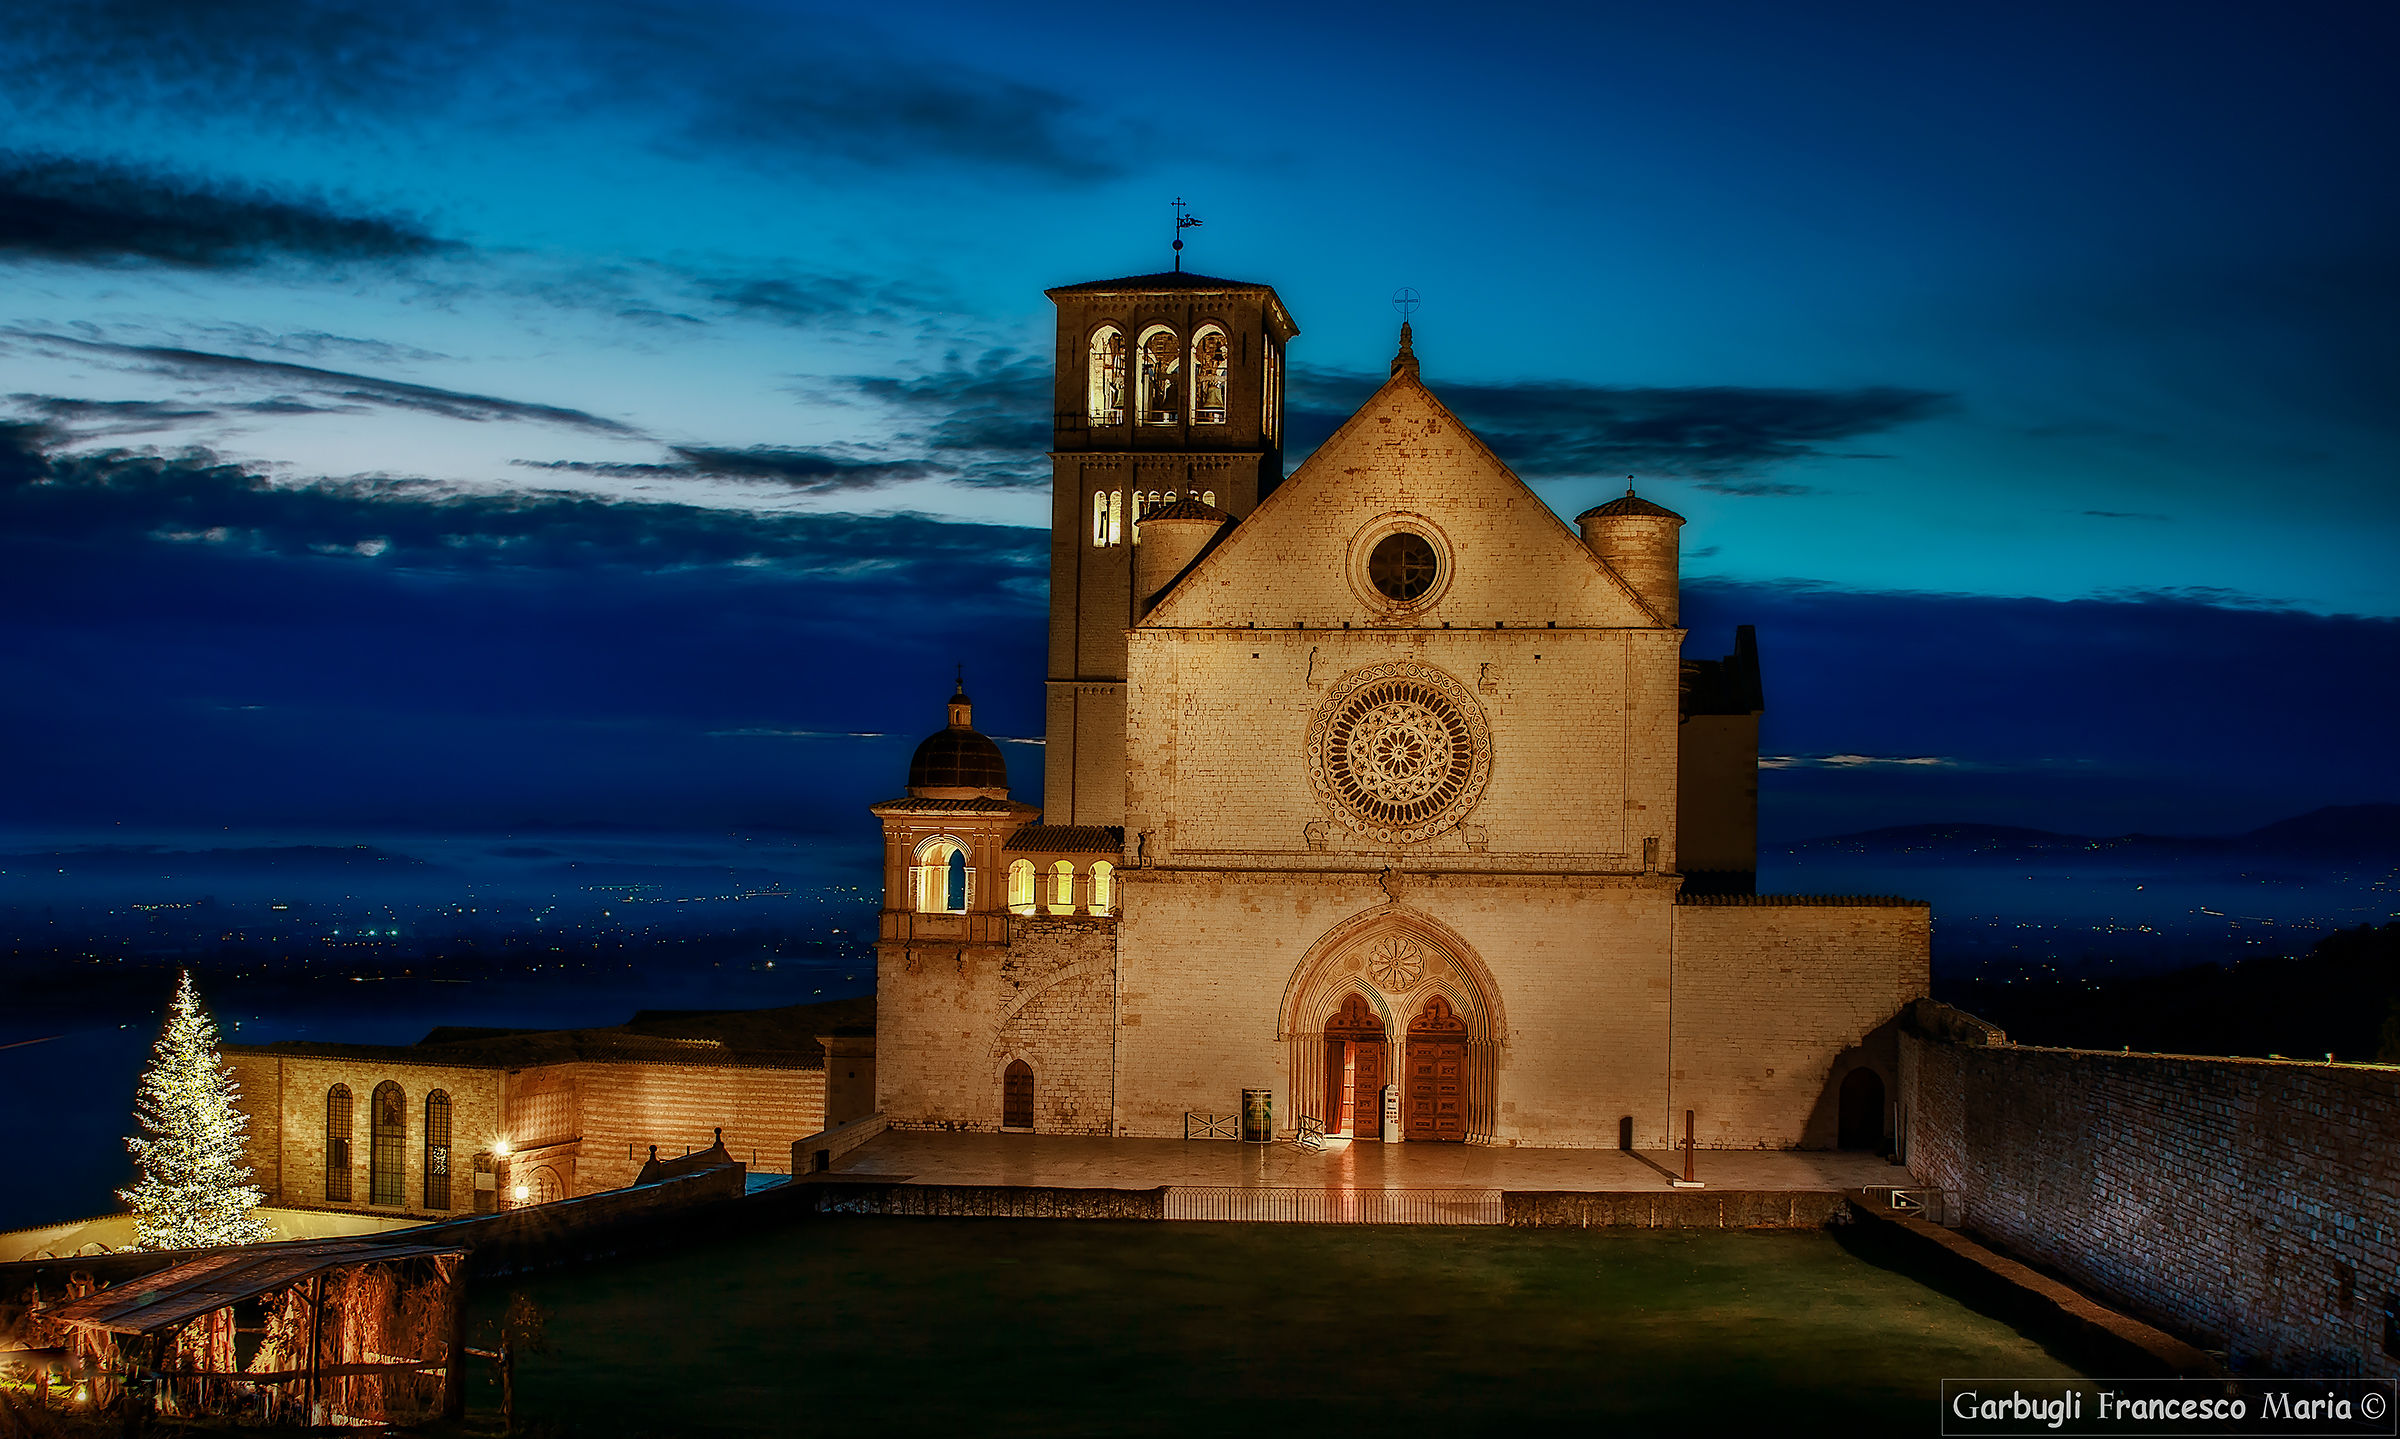 The Basilica and the Blue Hour...